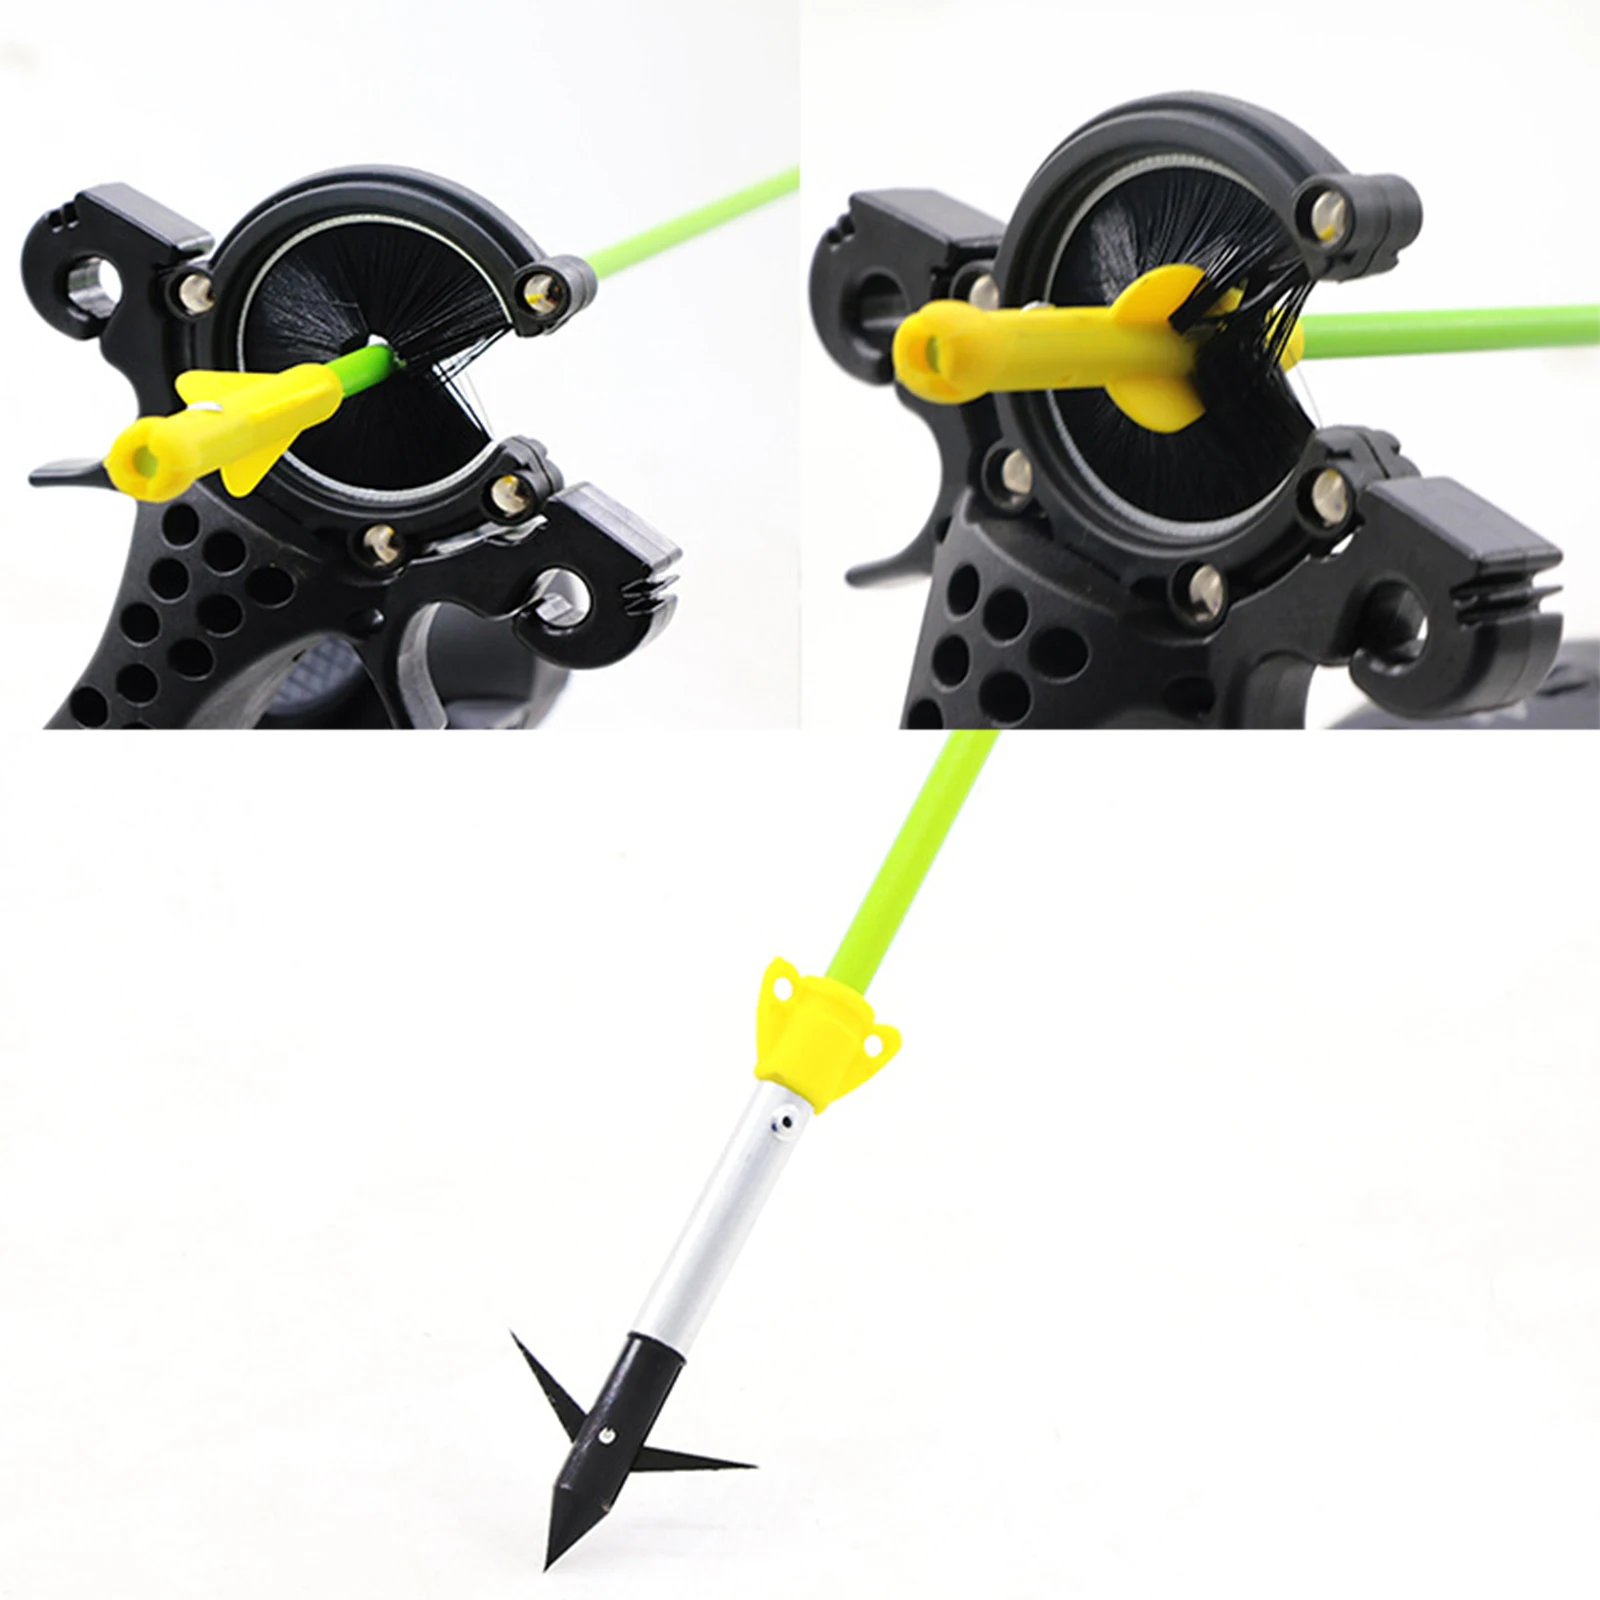 Slingshot Fishing Accessories Multi-function More Efficient Great Power  Portable Nylon Stainless Steel Bow Arrow Brush Bows